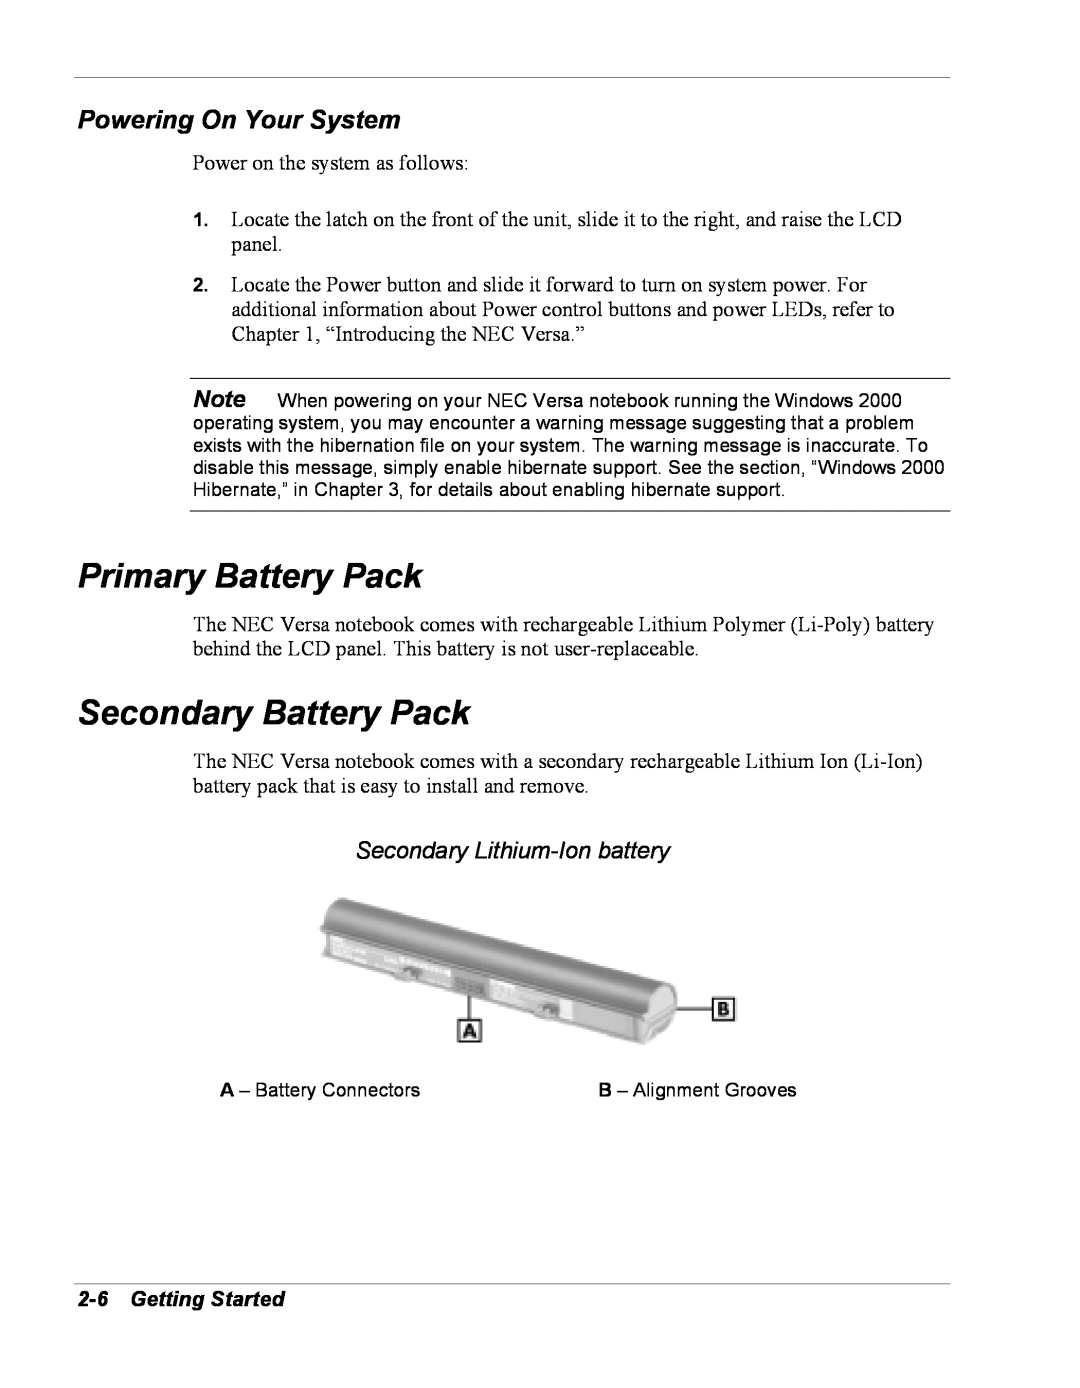 NEC Versa Series Primary Battery Pack, Secondary Battery Pack, Powering On Your System, Secondary Lithium-Ion battery 